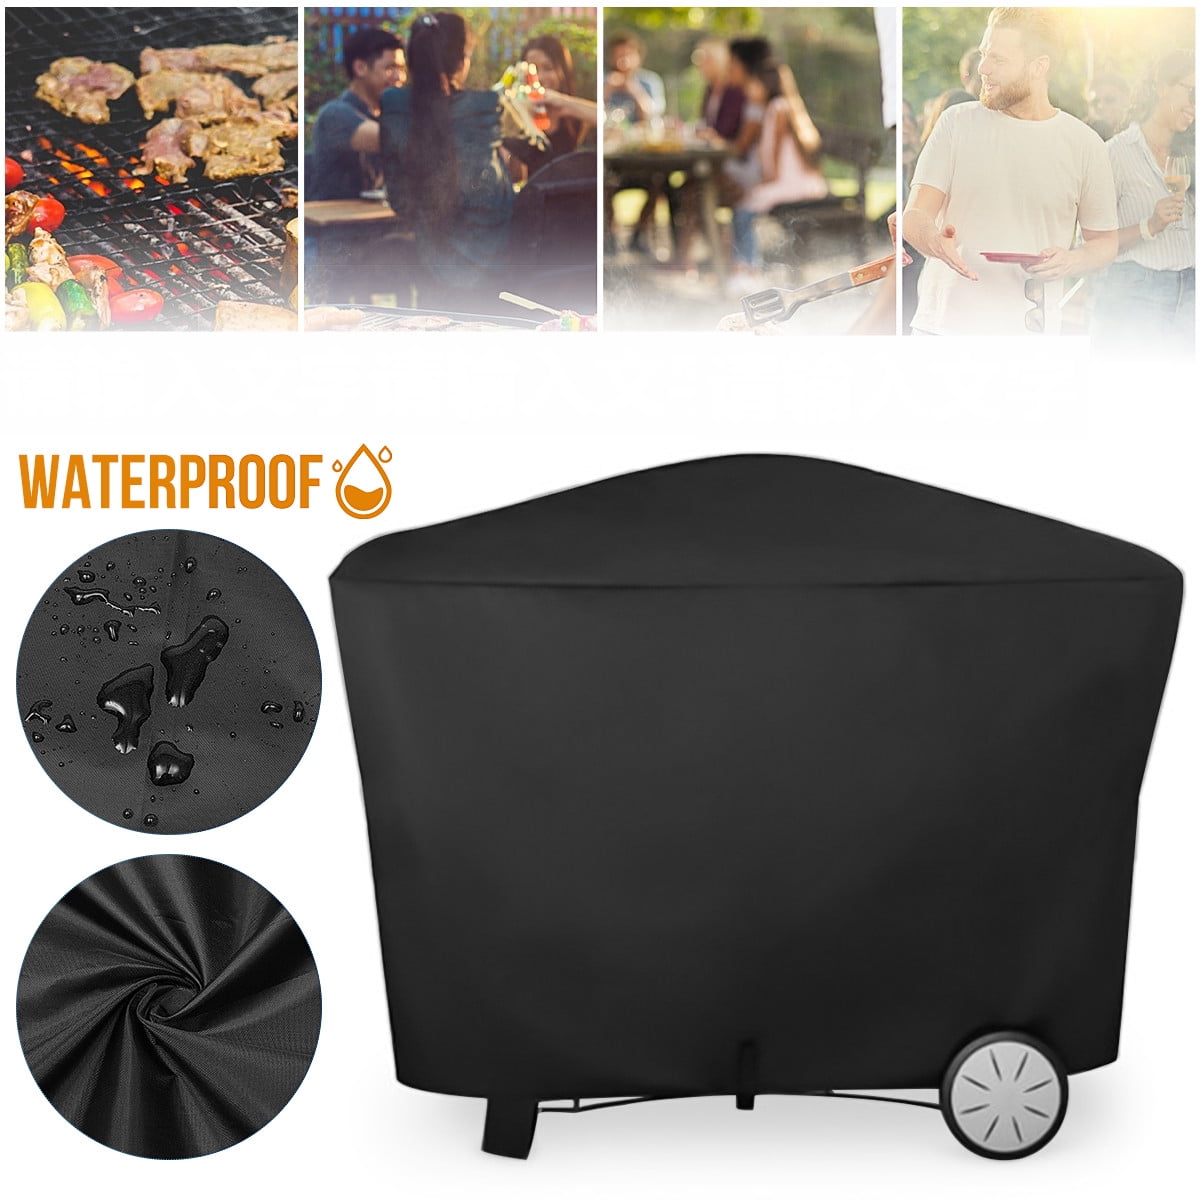 BBQ Grill Cover 57" Gas Barbecue Heavy UV Duty Protection Waterproof Outdoor